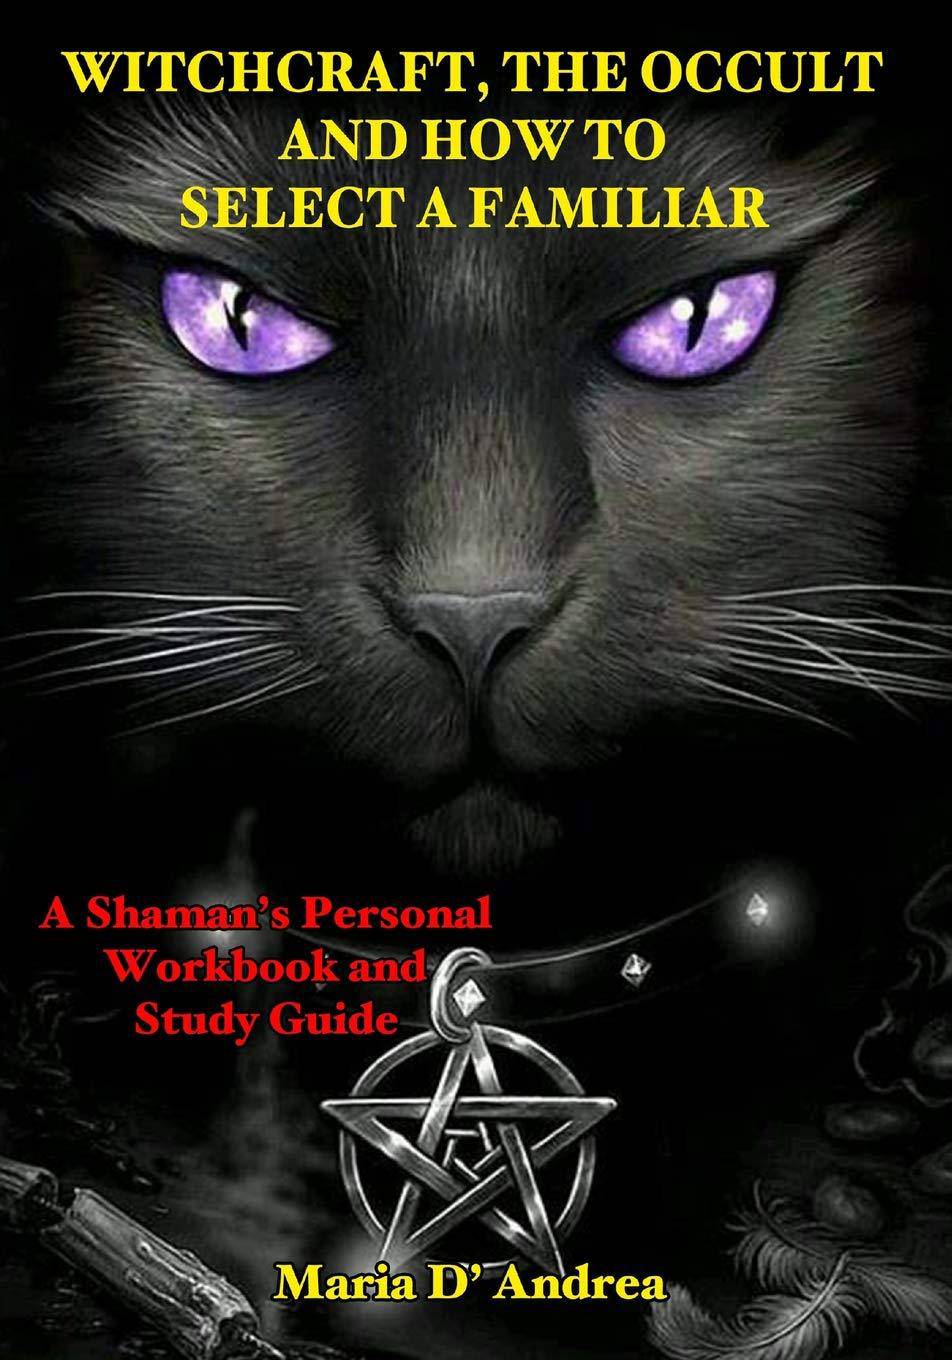 Witchcraft, The Occult and How to Select A Familiar - SureShot Books Publishing LLC